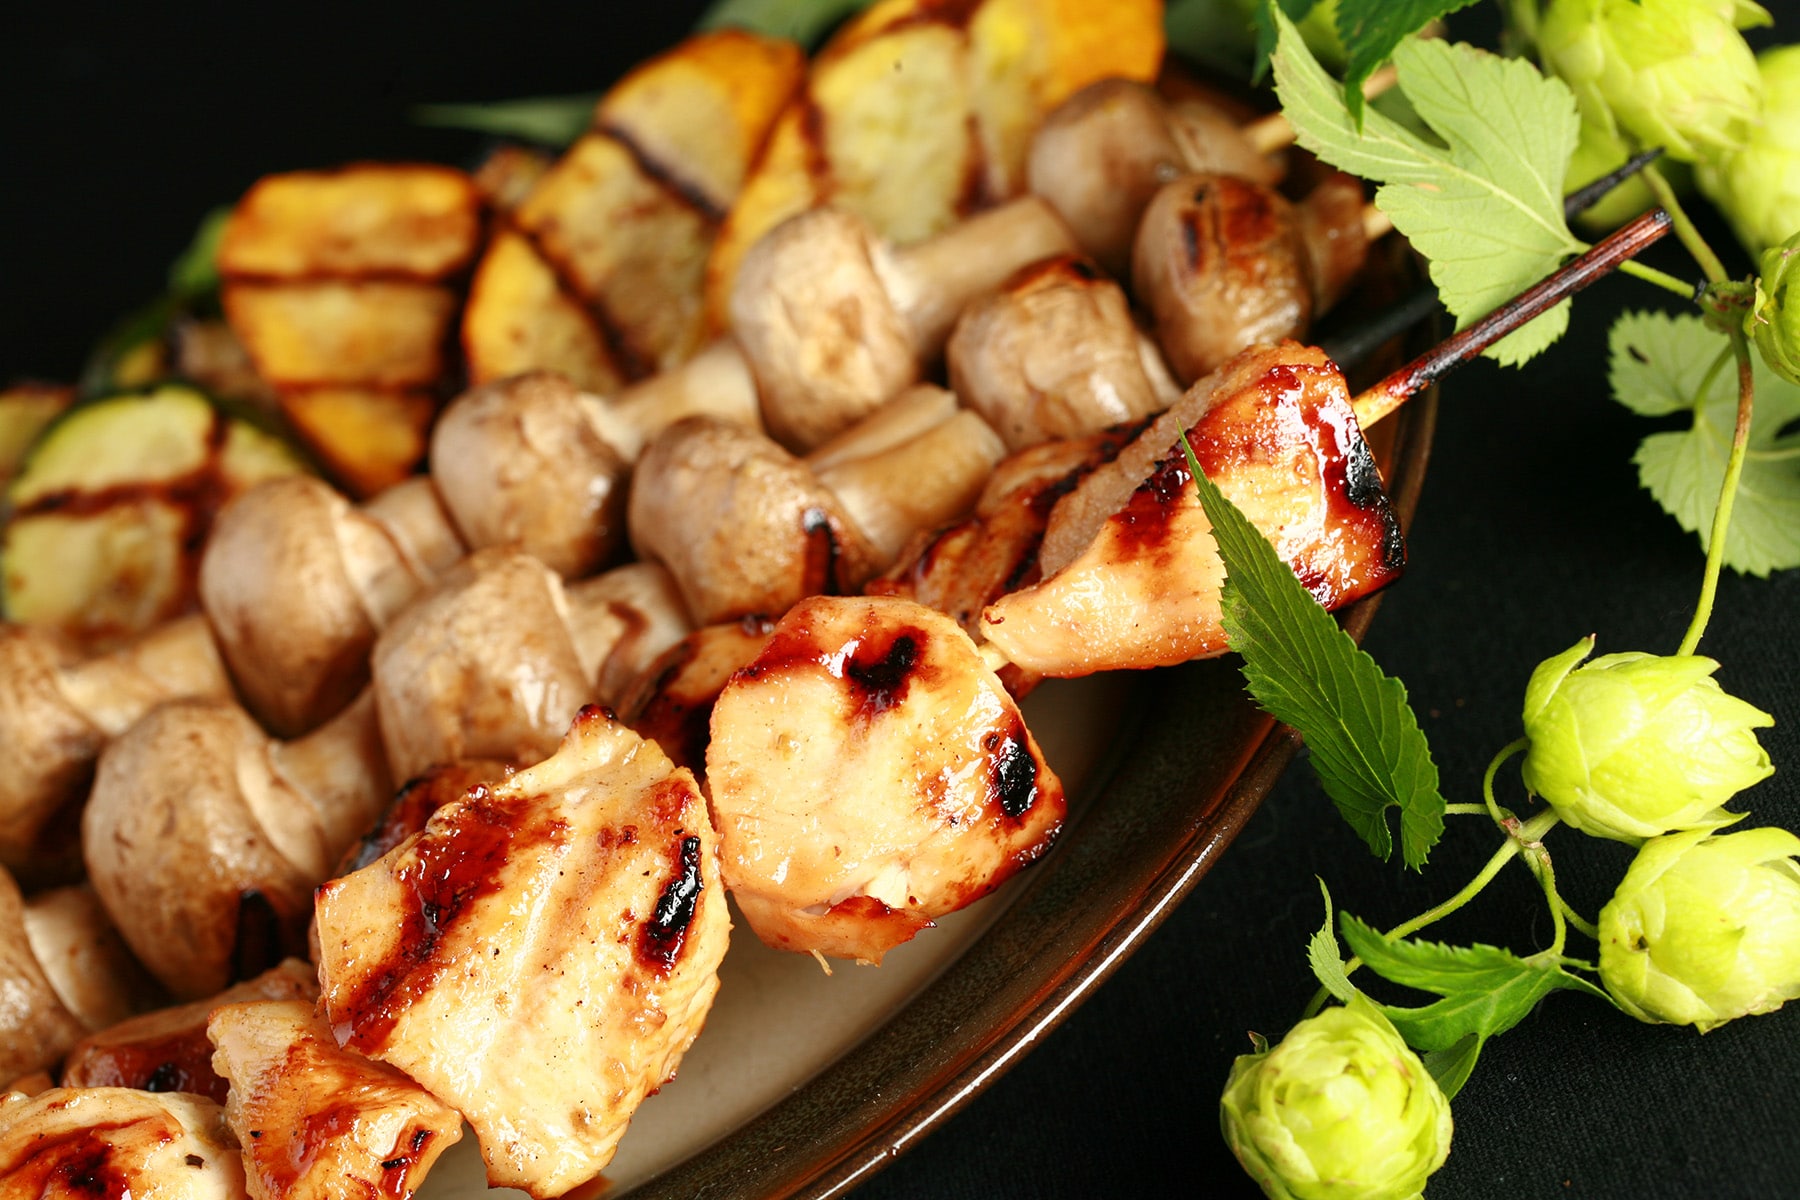 Skewers of hop-marinated grilled chicken, mushrooms, and zucchini are lined up on a brown platter. A hop bine with flowers wraps around the back end of the platter.